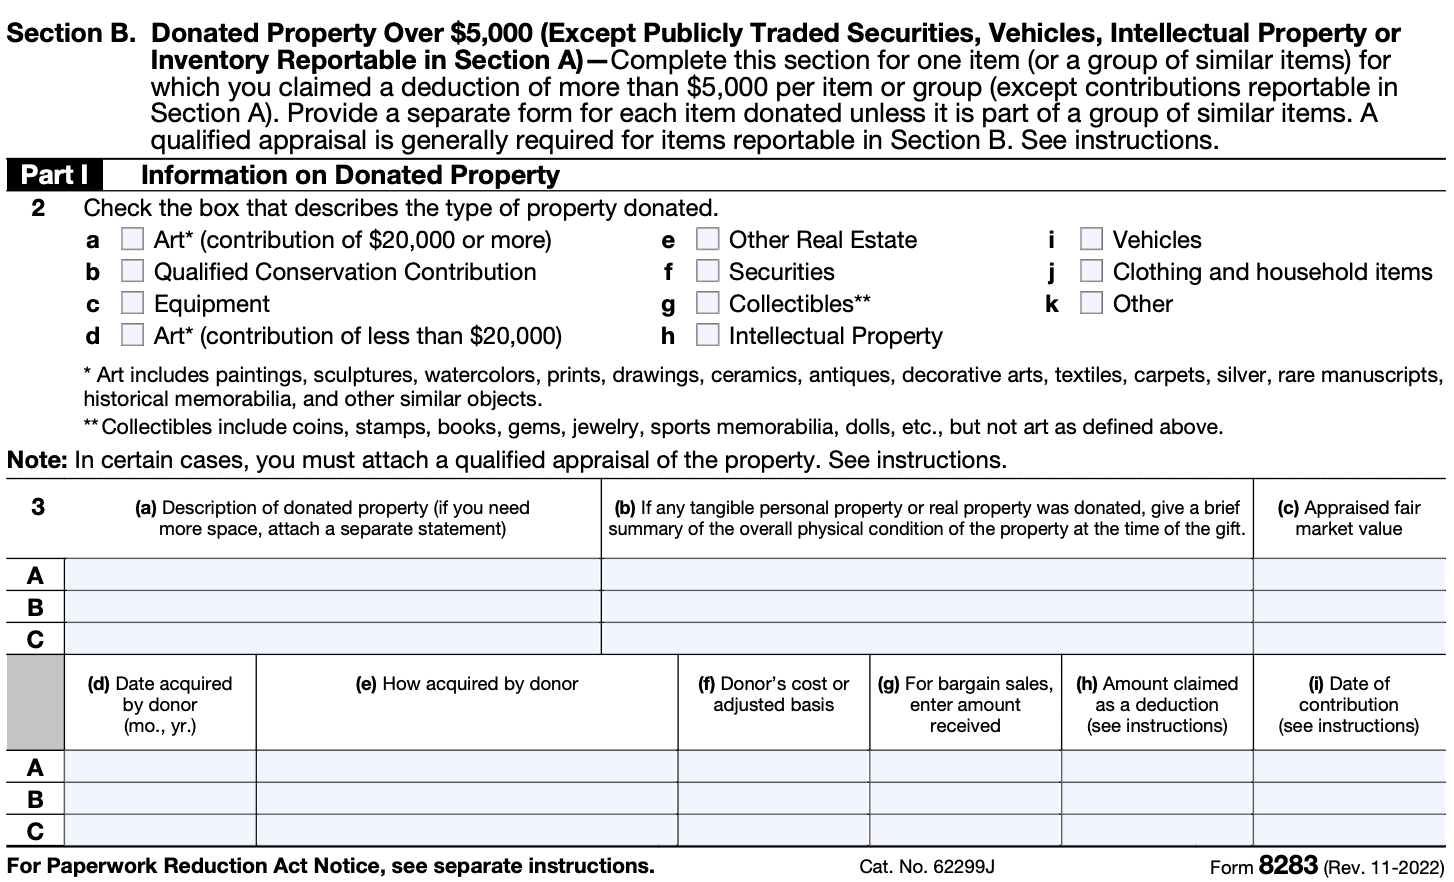 irs form 8283, section b, part i, information on donated property